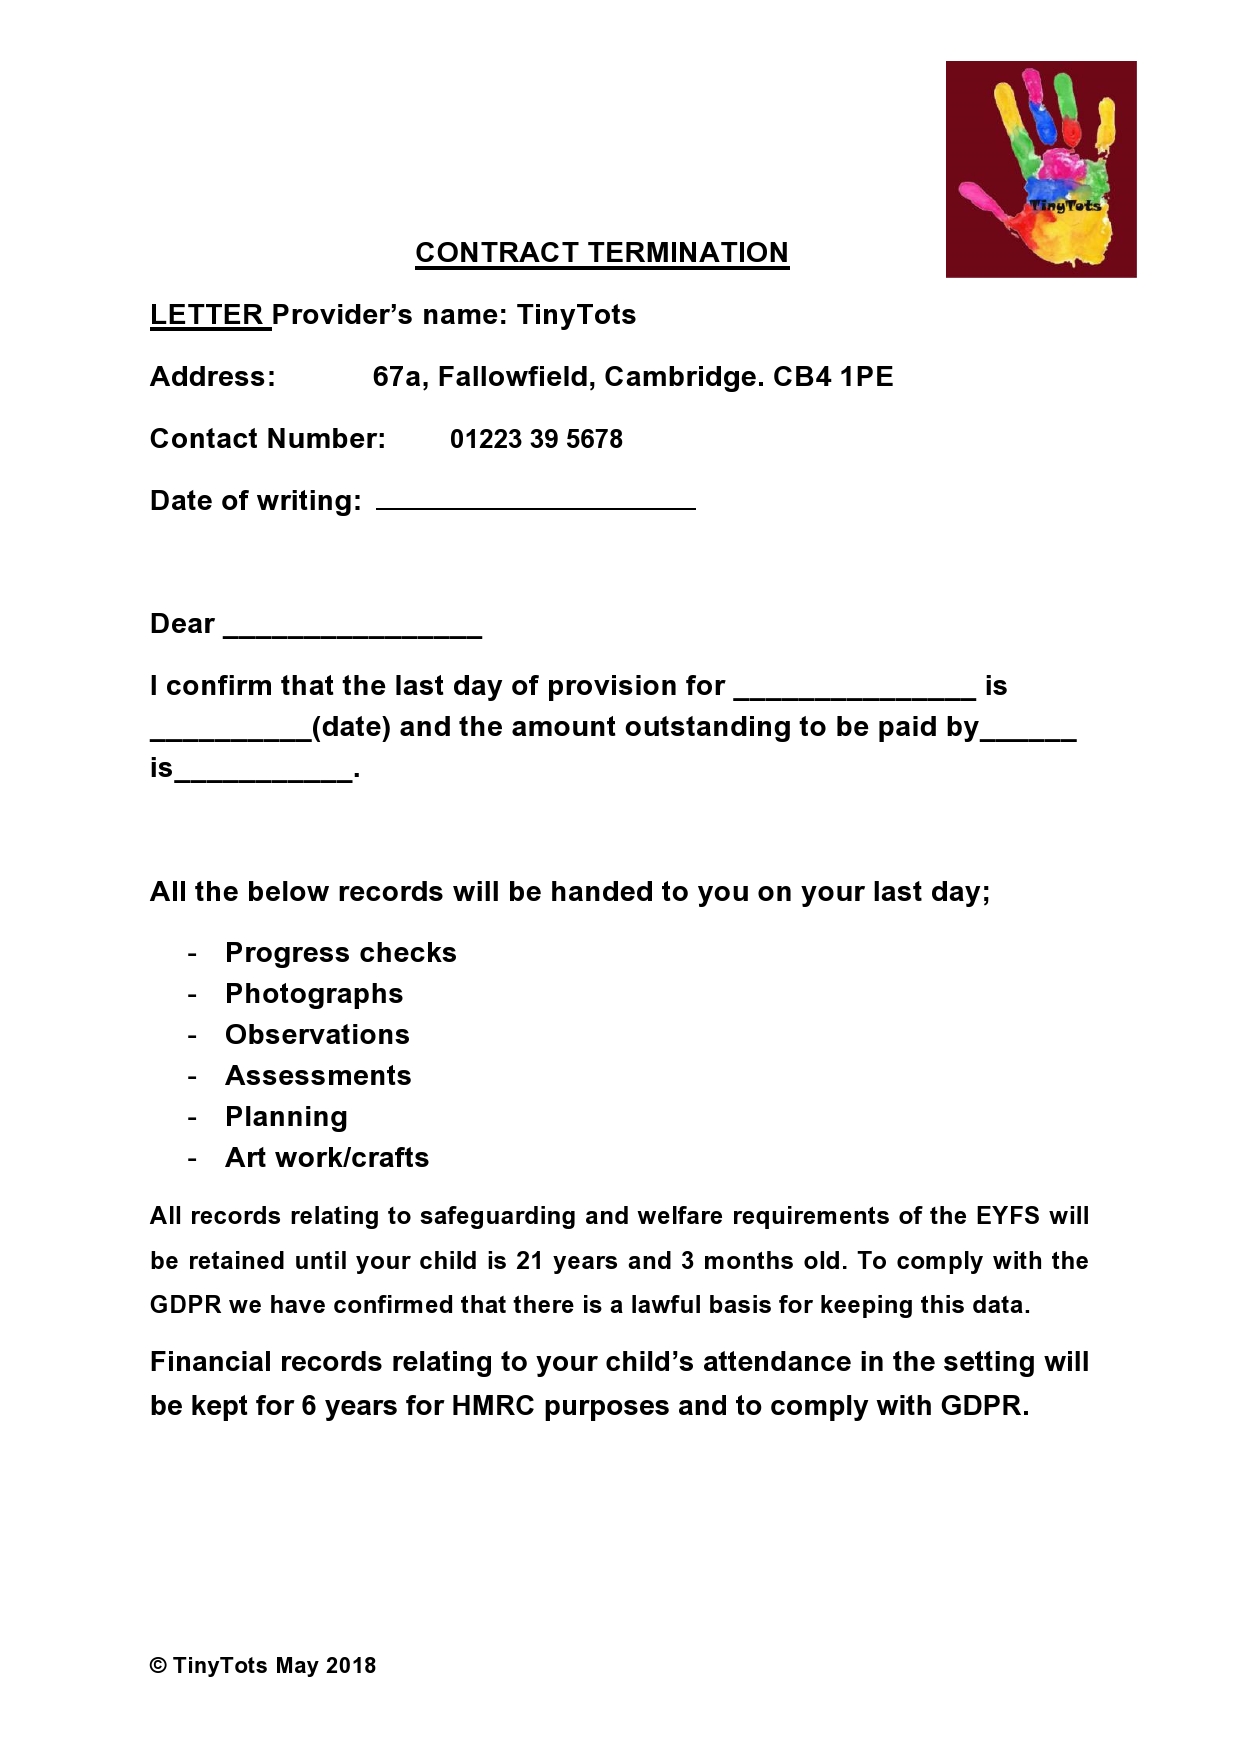 Free contract termination letter 02